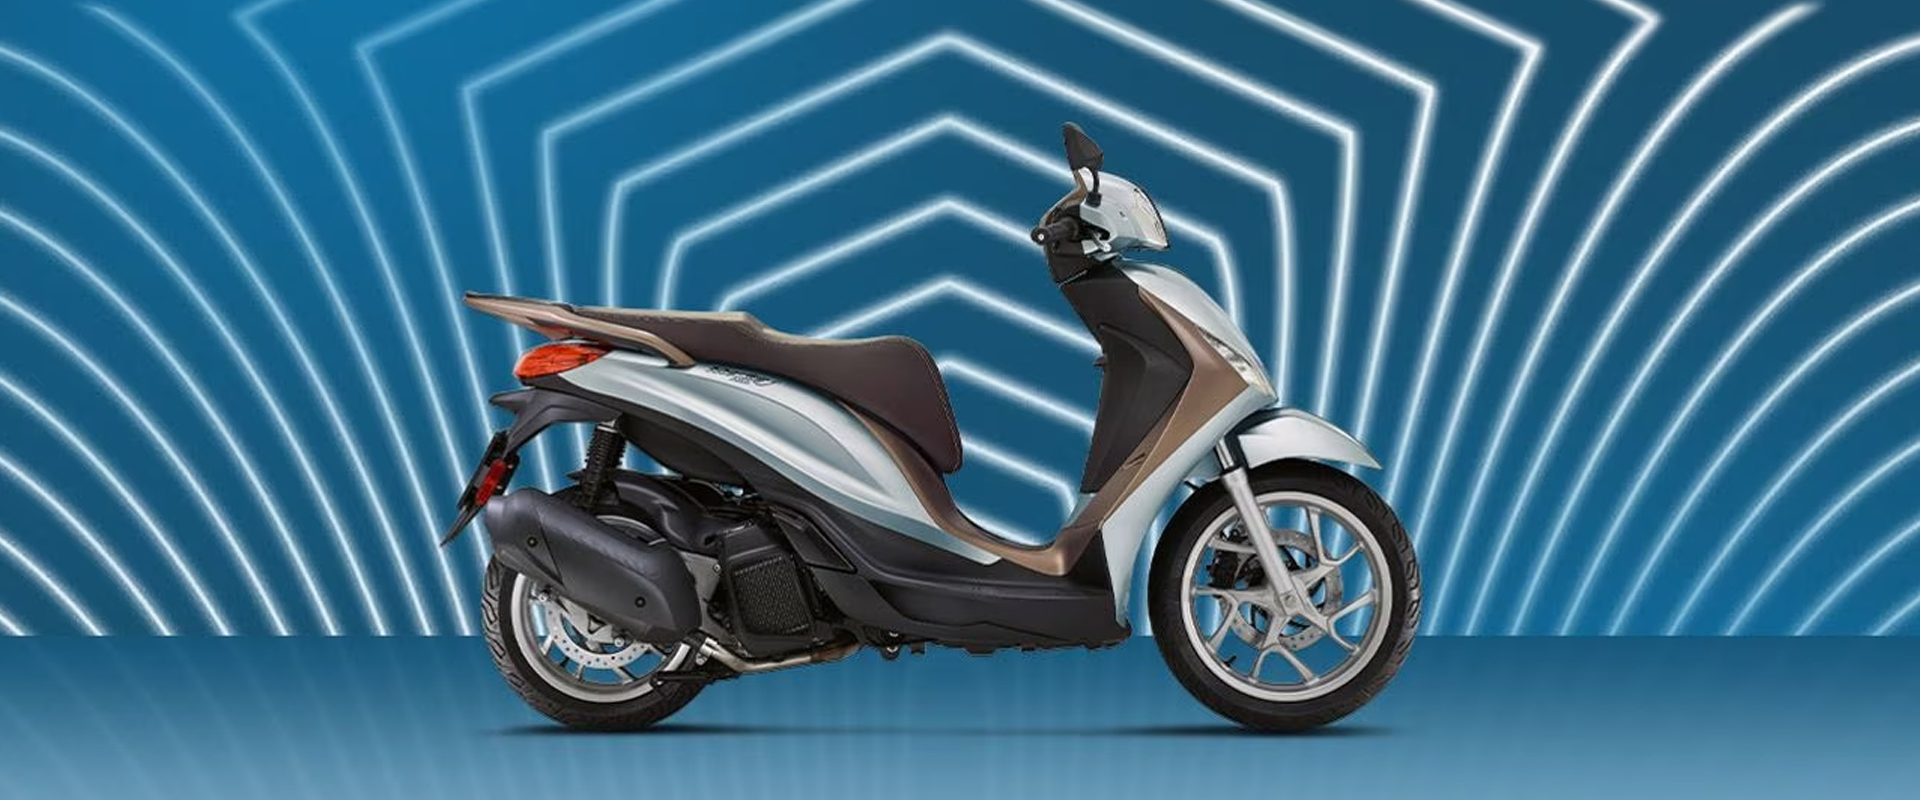 Piaggio Medley 125 yours with a 300€ discount and free insurance*￼